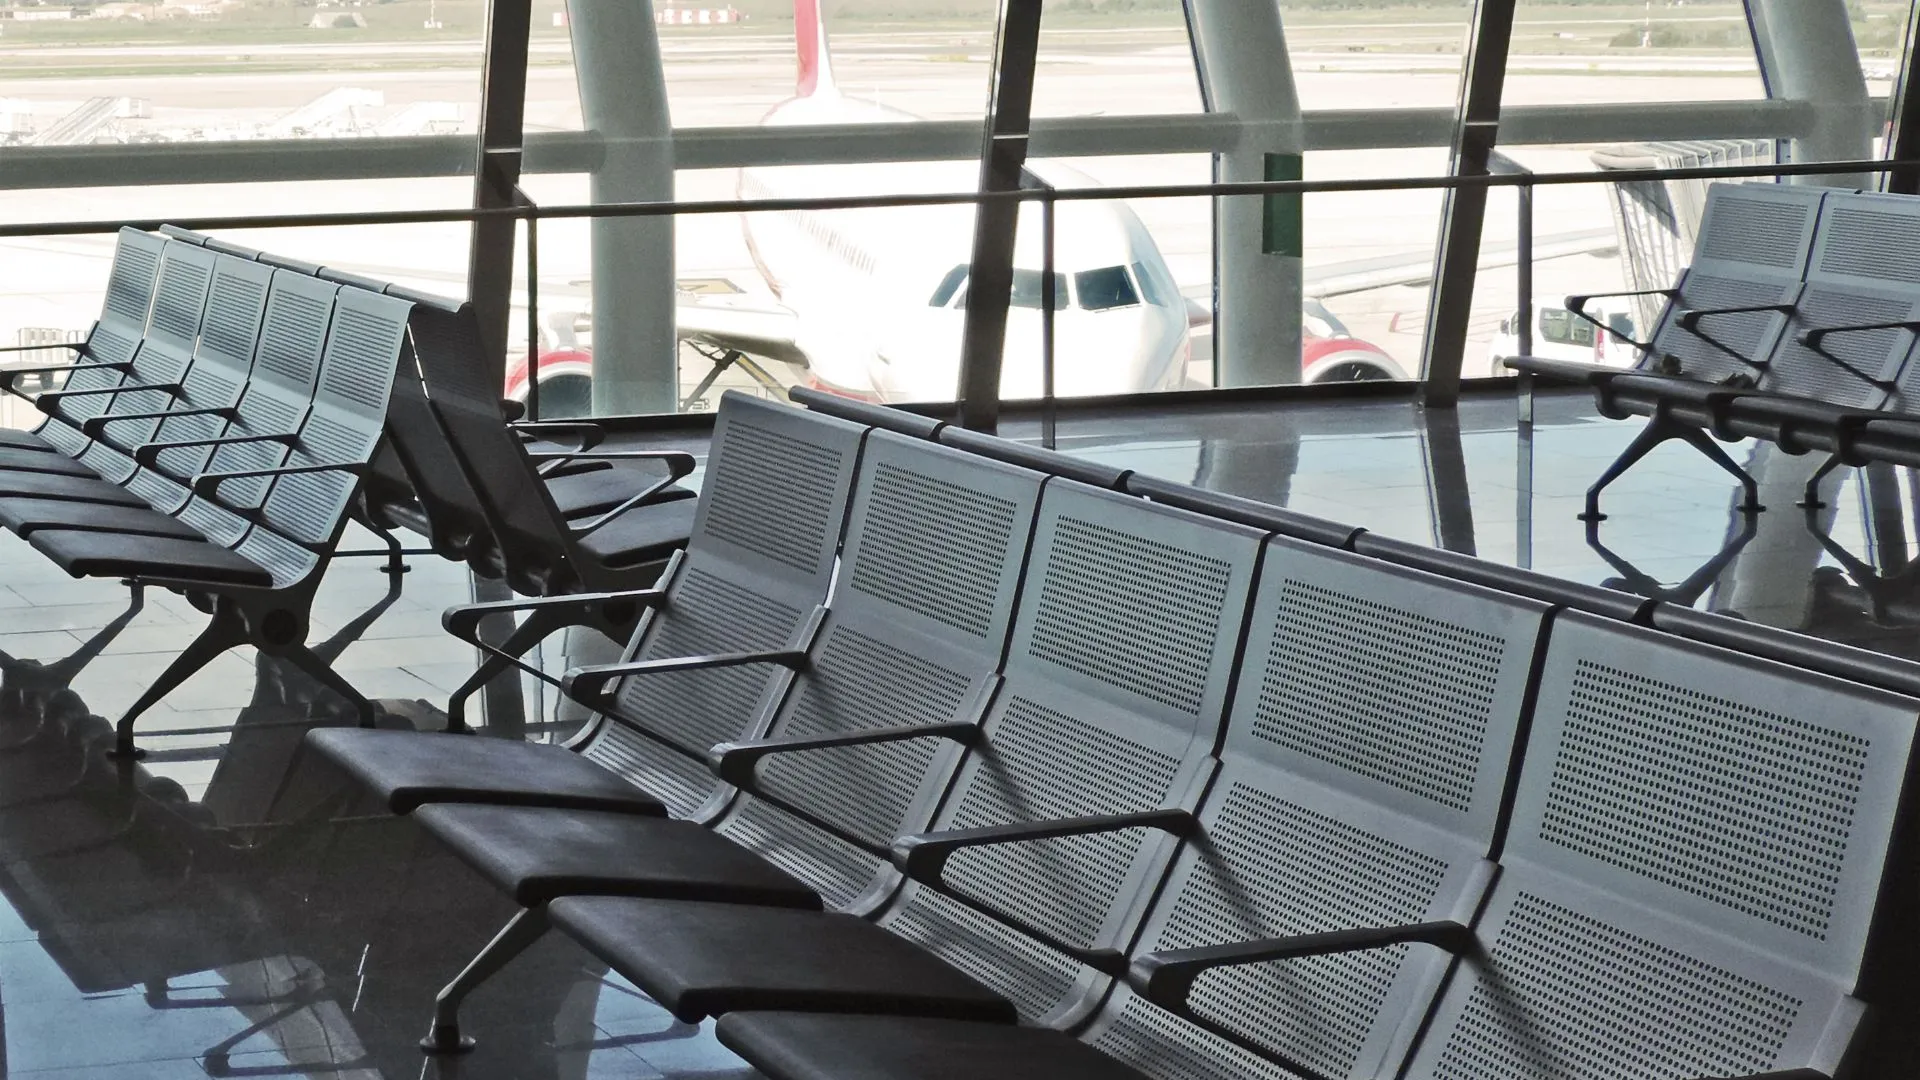 Shot of an airport waiting area, featuring a seated area overlooking the windows in the background of the shot, an airplane is grounded in the background outside